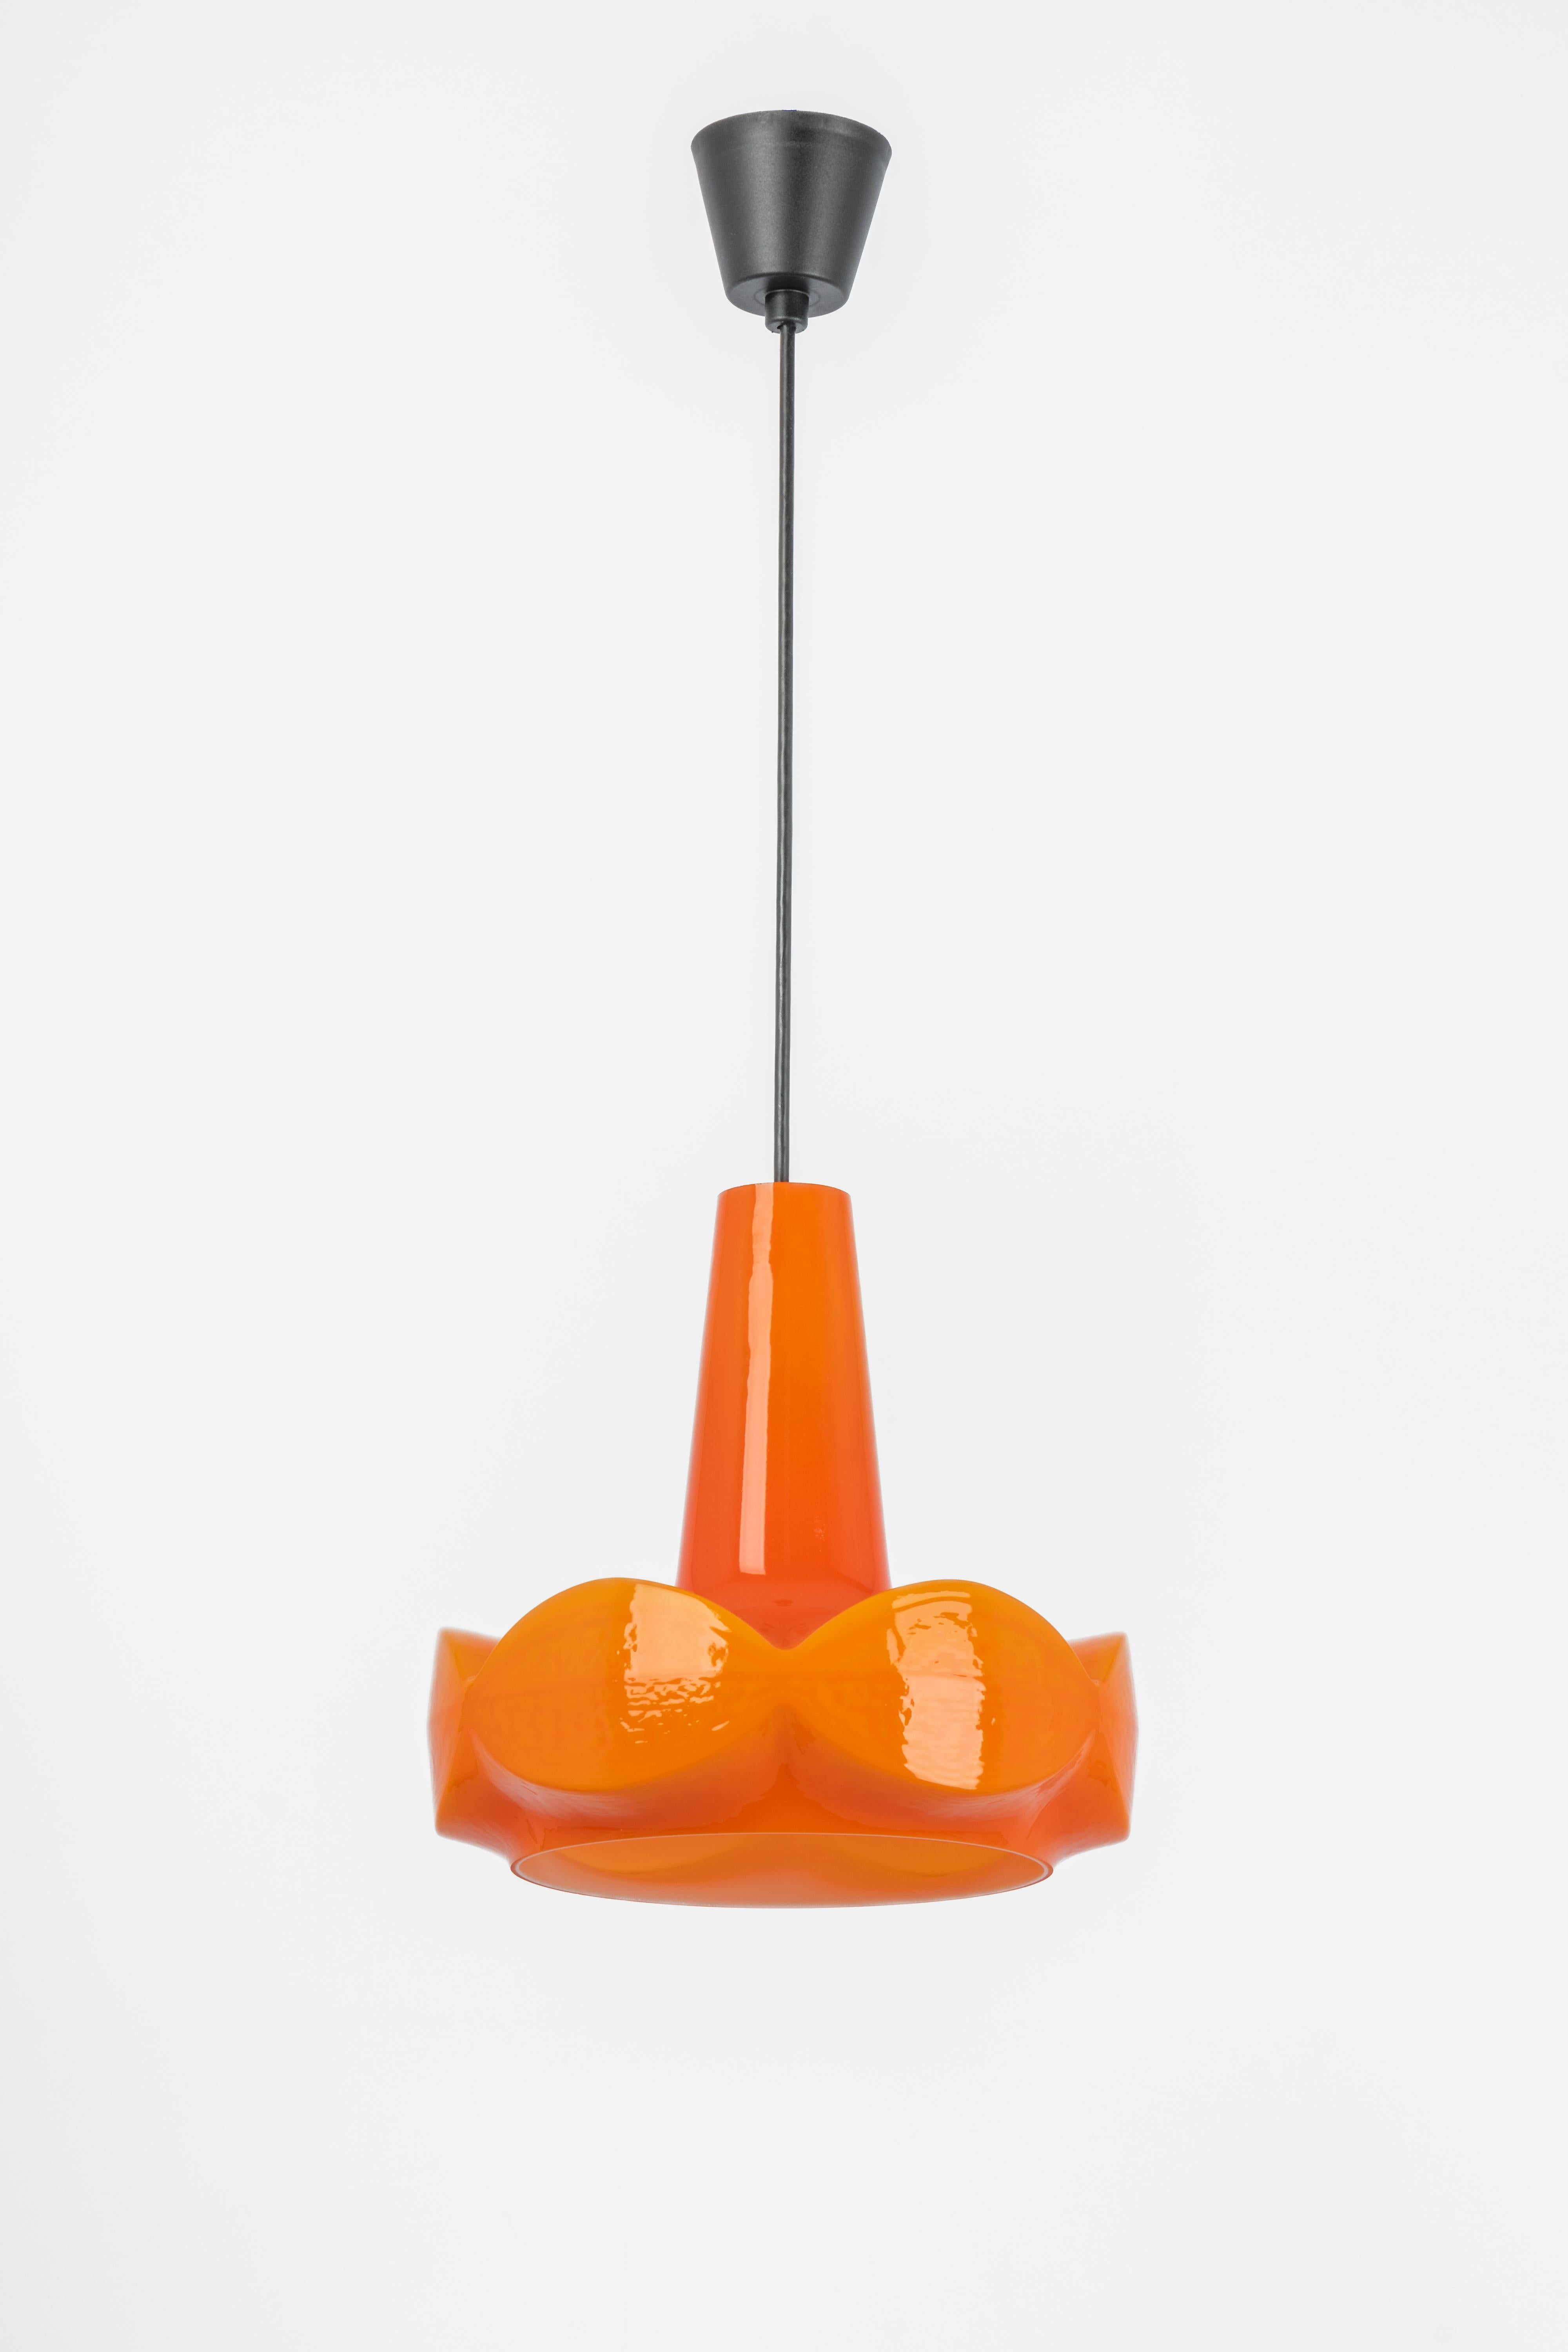 Petite Orange glass pendant light by Peill & Putzler, manufactured in Germany, circa the 1970s.

High quality and in very good condition. Cleaned, well-wired, and ready to use. 
The fixture requires 1x E27 Standard bulbs with 100W max
Light